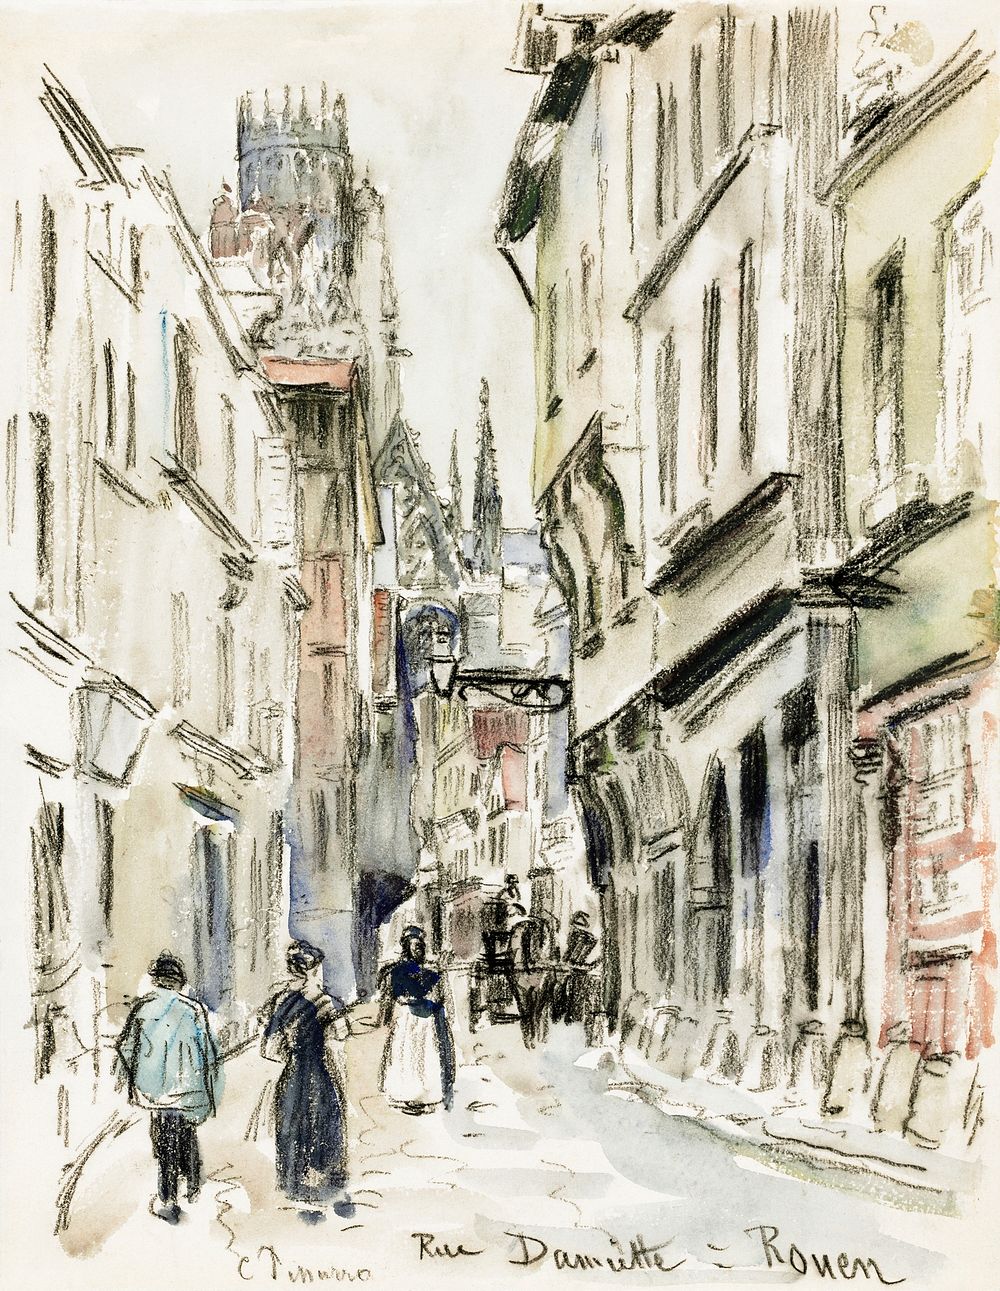 Rue Damiette, Rouen (ca. 1884) by Camille Pissarro. Original from The Cleveland Museum of Art. Digitally enhanced by…